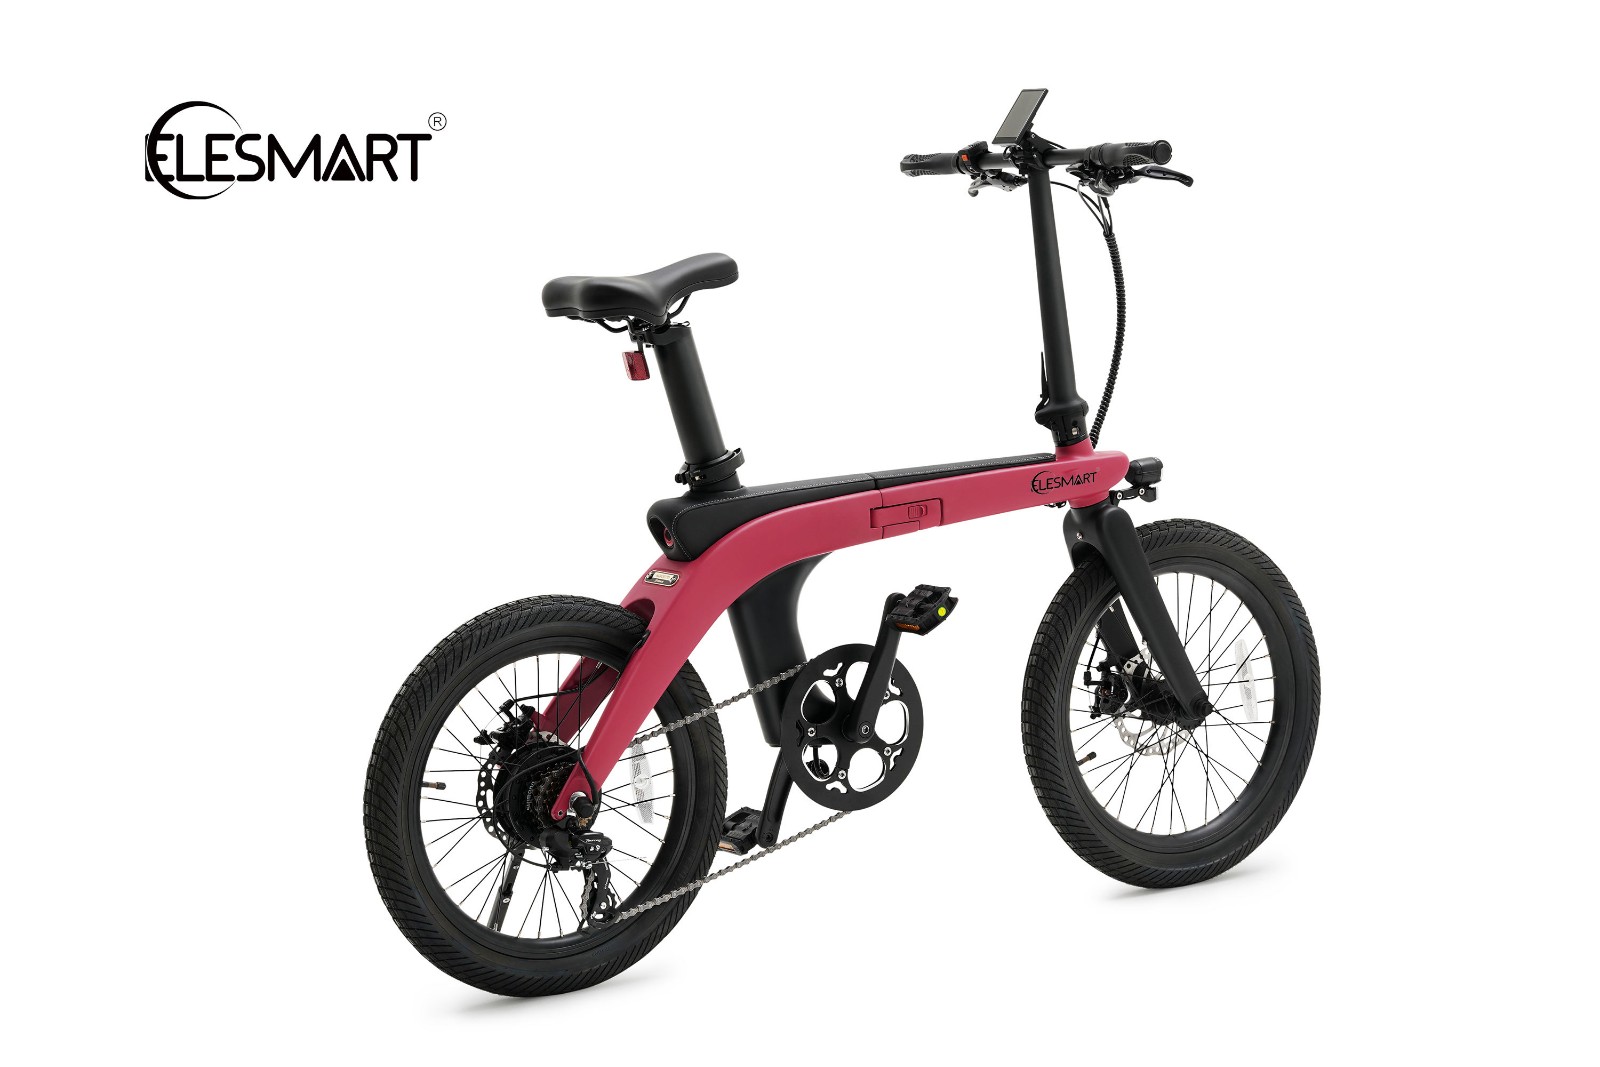 Cnebikes Manufacture Torque Sensor 36V 250W 60KM 20-inch Foldable Carbon Fiber Electric Power-assisted Bicycle Bike CF1 Ebike